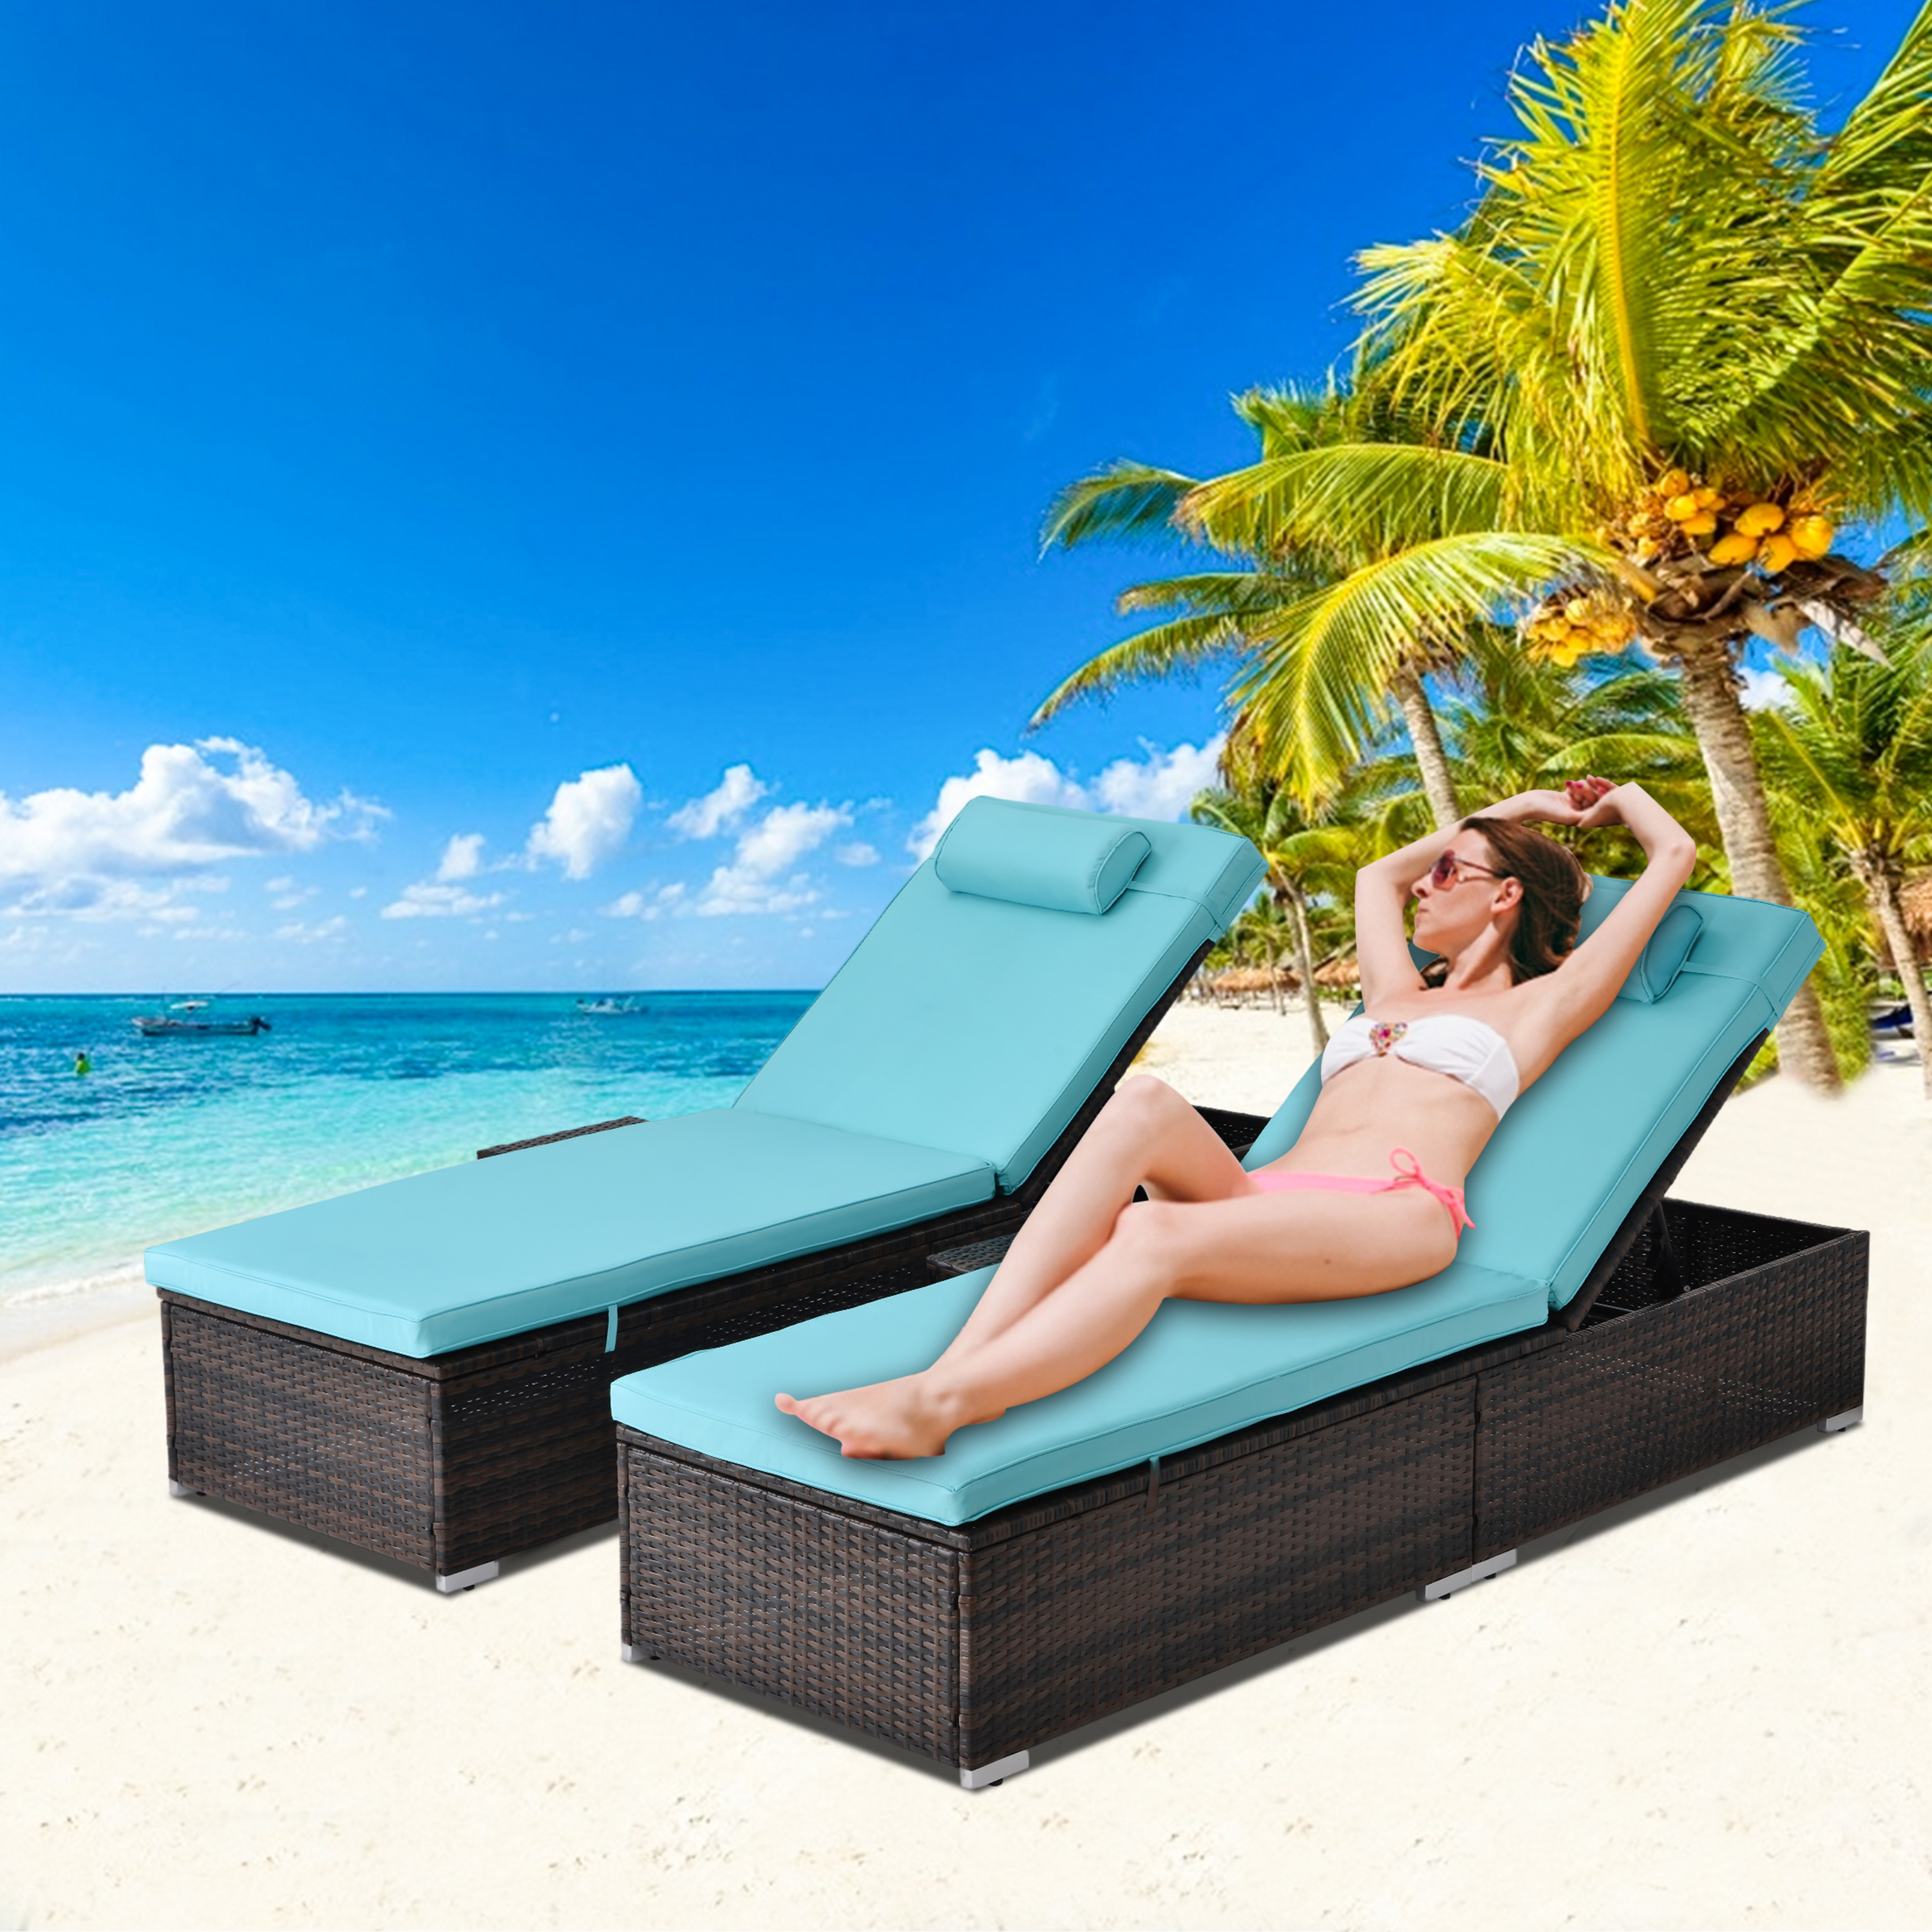 Segmart Outdoor Patio Chaise Lounge Chairs Furniture Set, PE Rattan Wicker Beach Pool Lounge Chair with Side Table, Adjustable 5 Position, Reclining Chaise Chairs, Blue, SS2344 - image 1 of 8